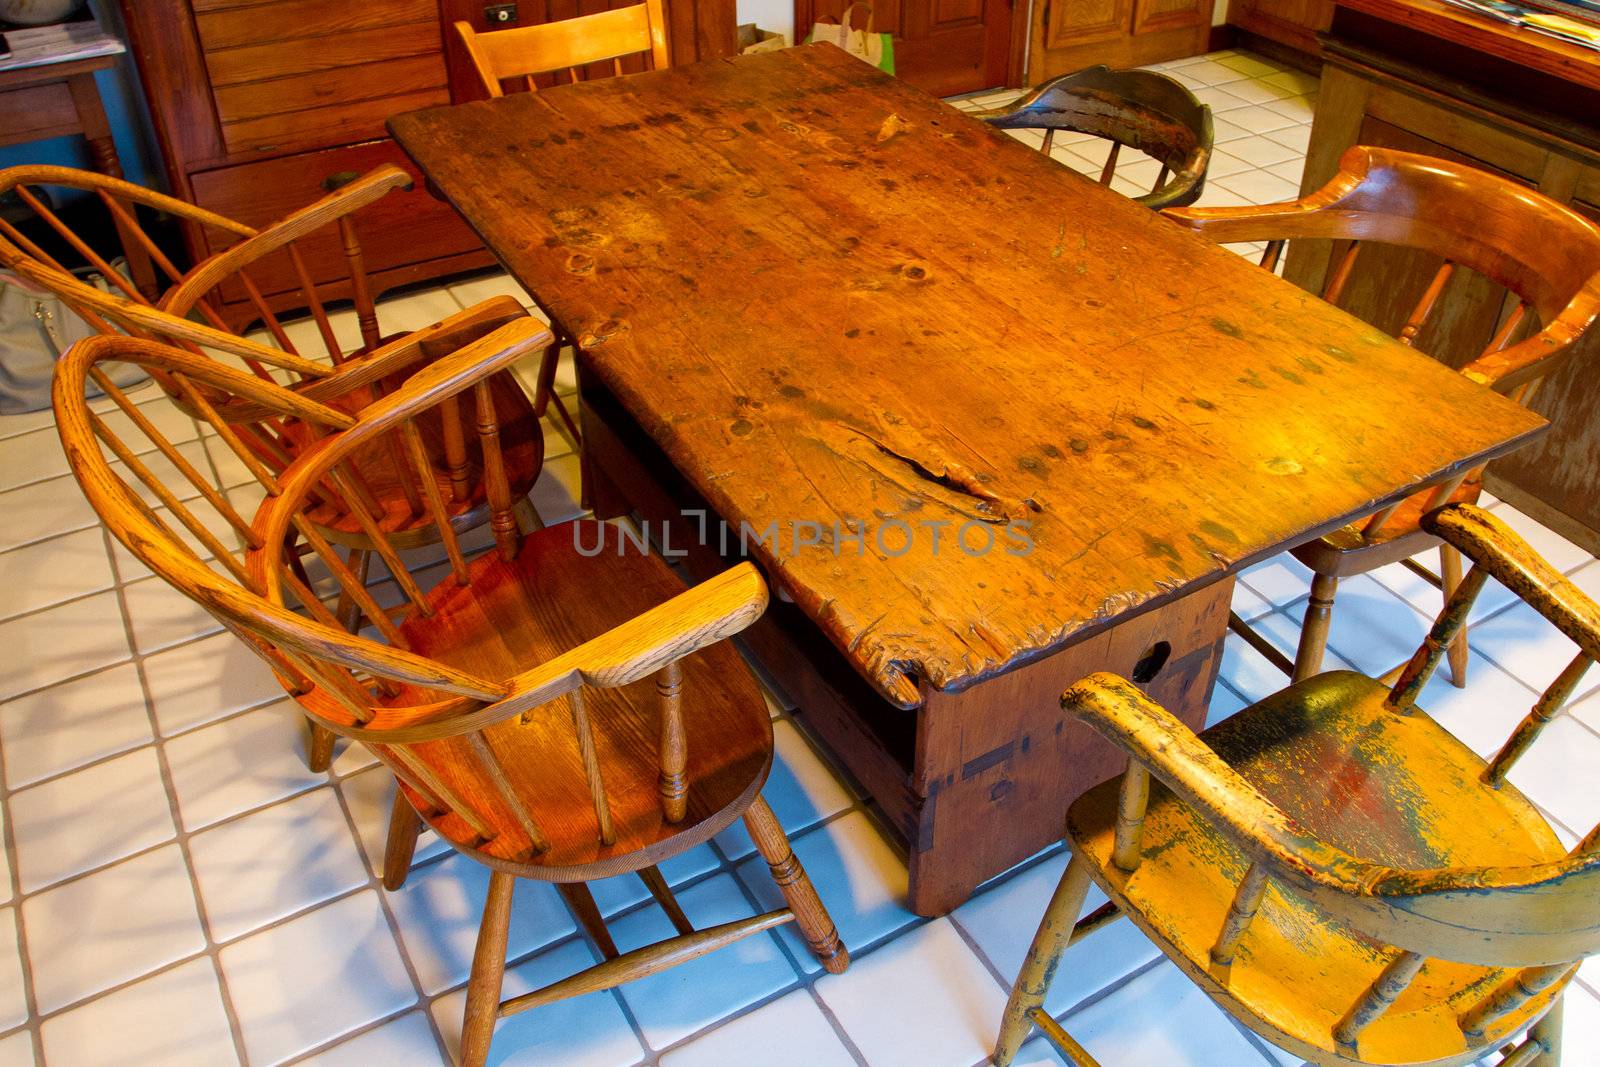 A very old antique dining set with a table and chairs in a kitchen.